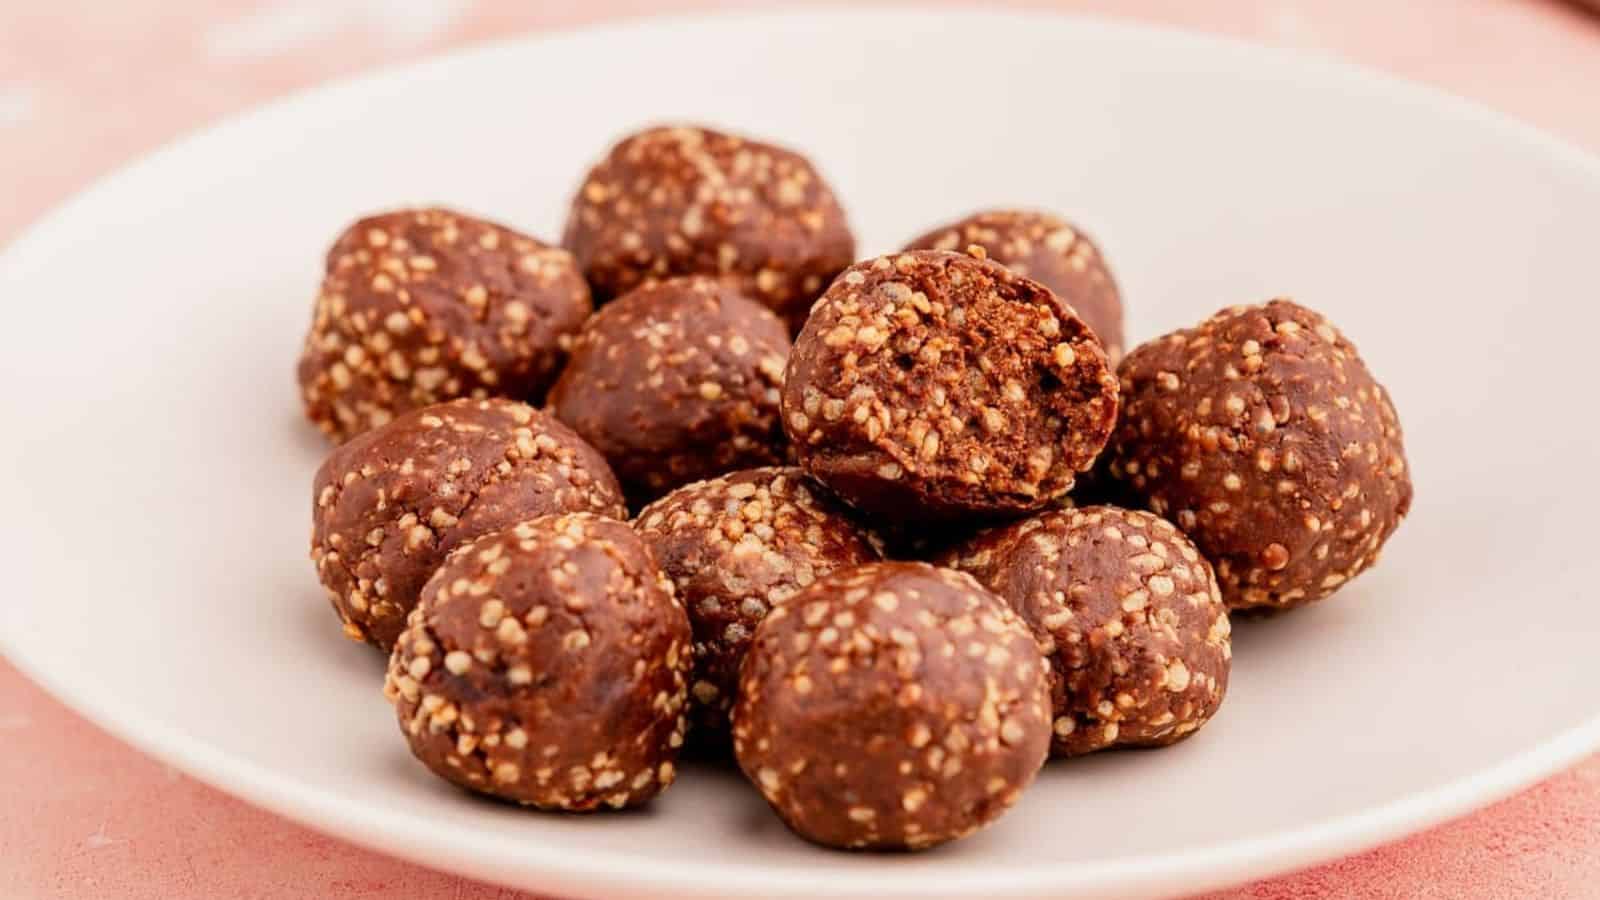 A close up image of chocolate peanut butter quinoa crunch bites in a white plate.